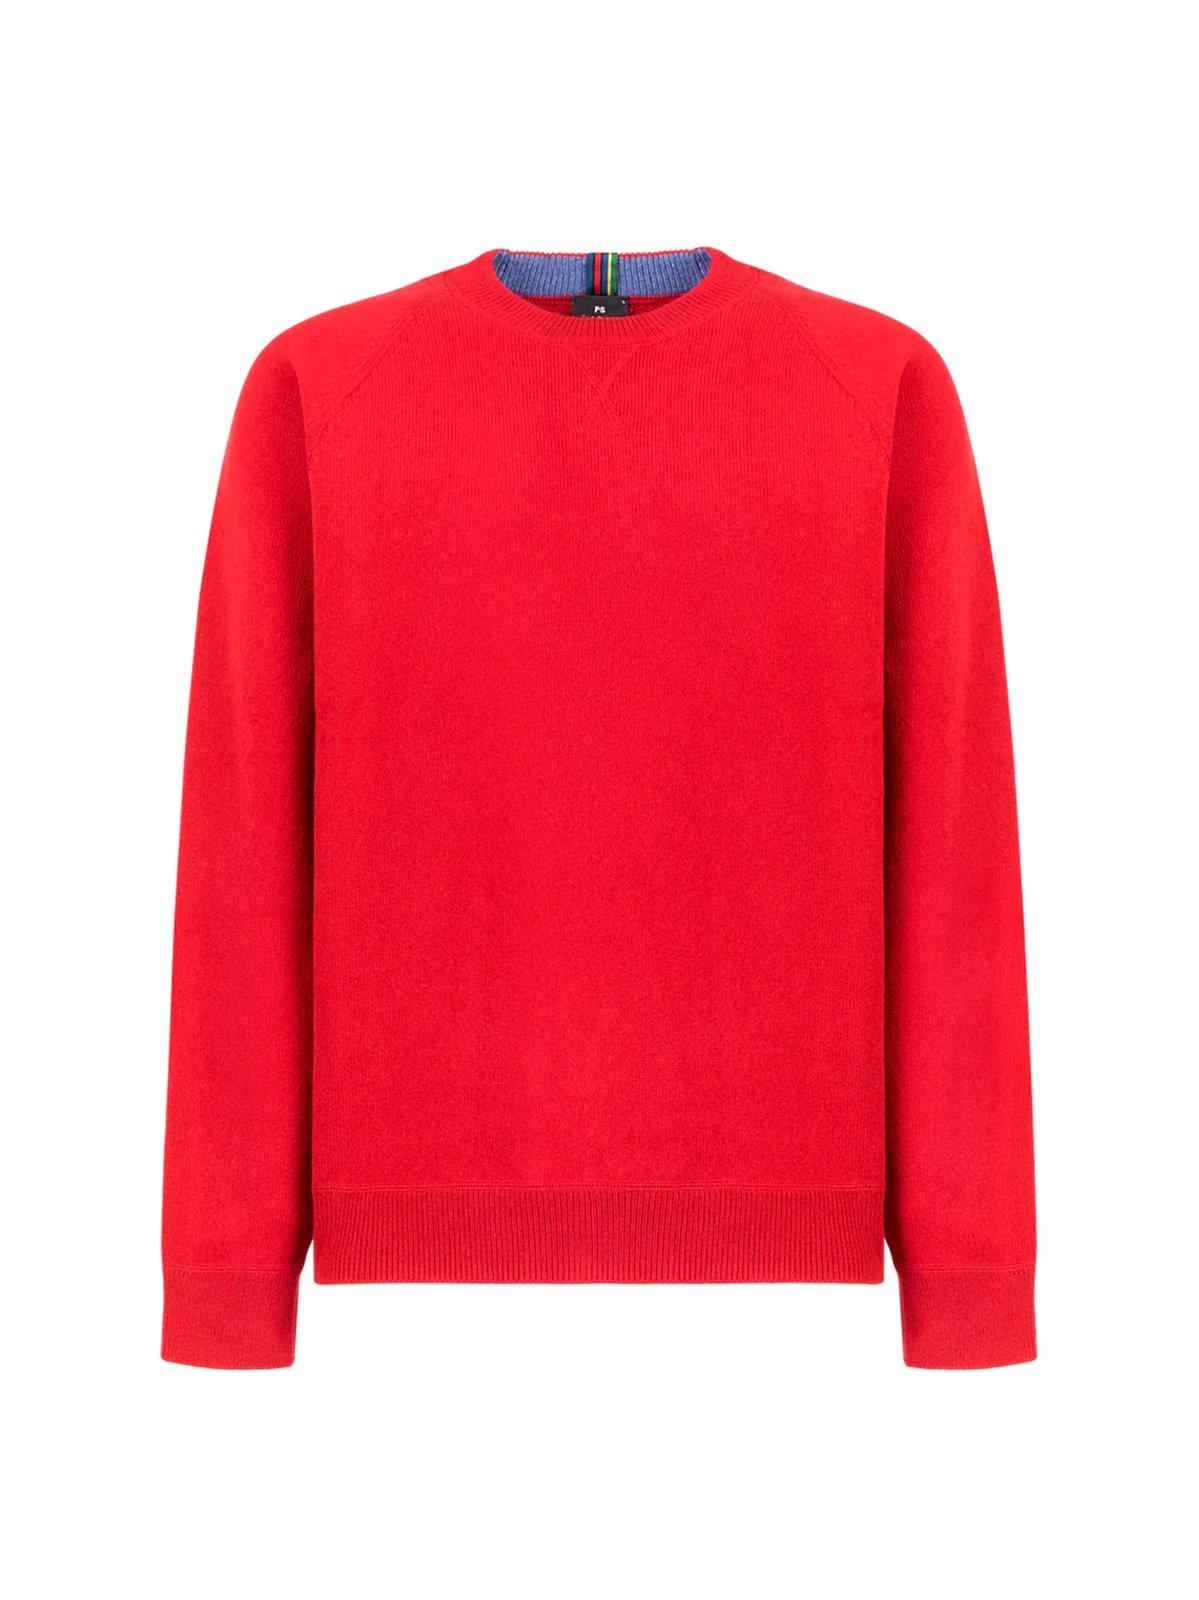 Crewneck Knitted Jumper Sweater